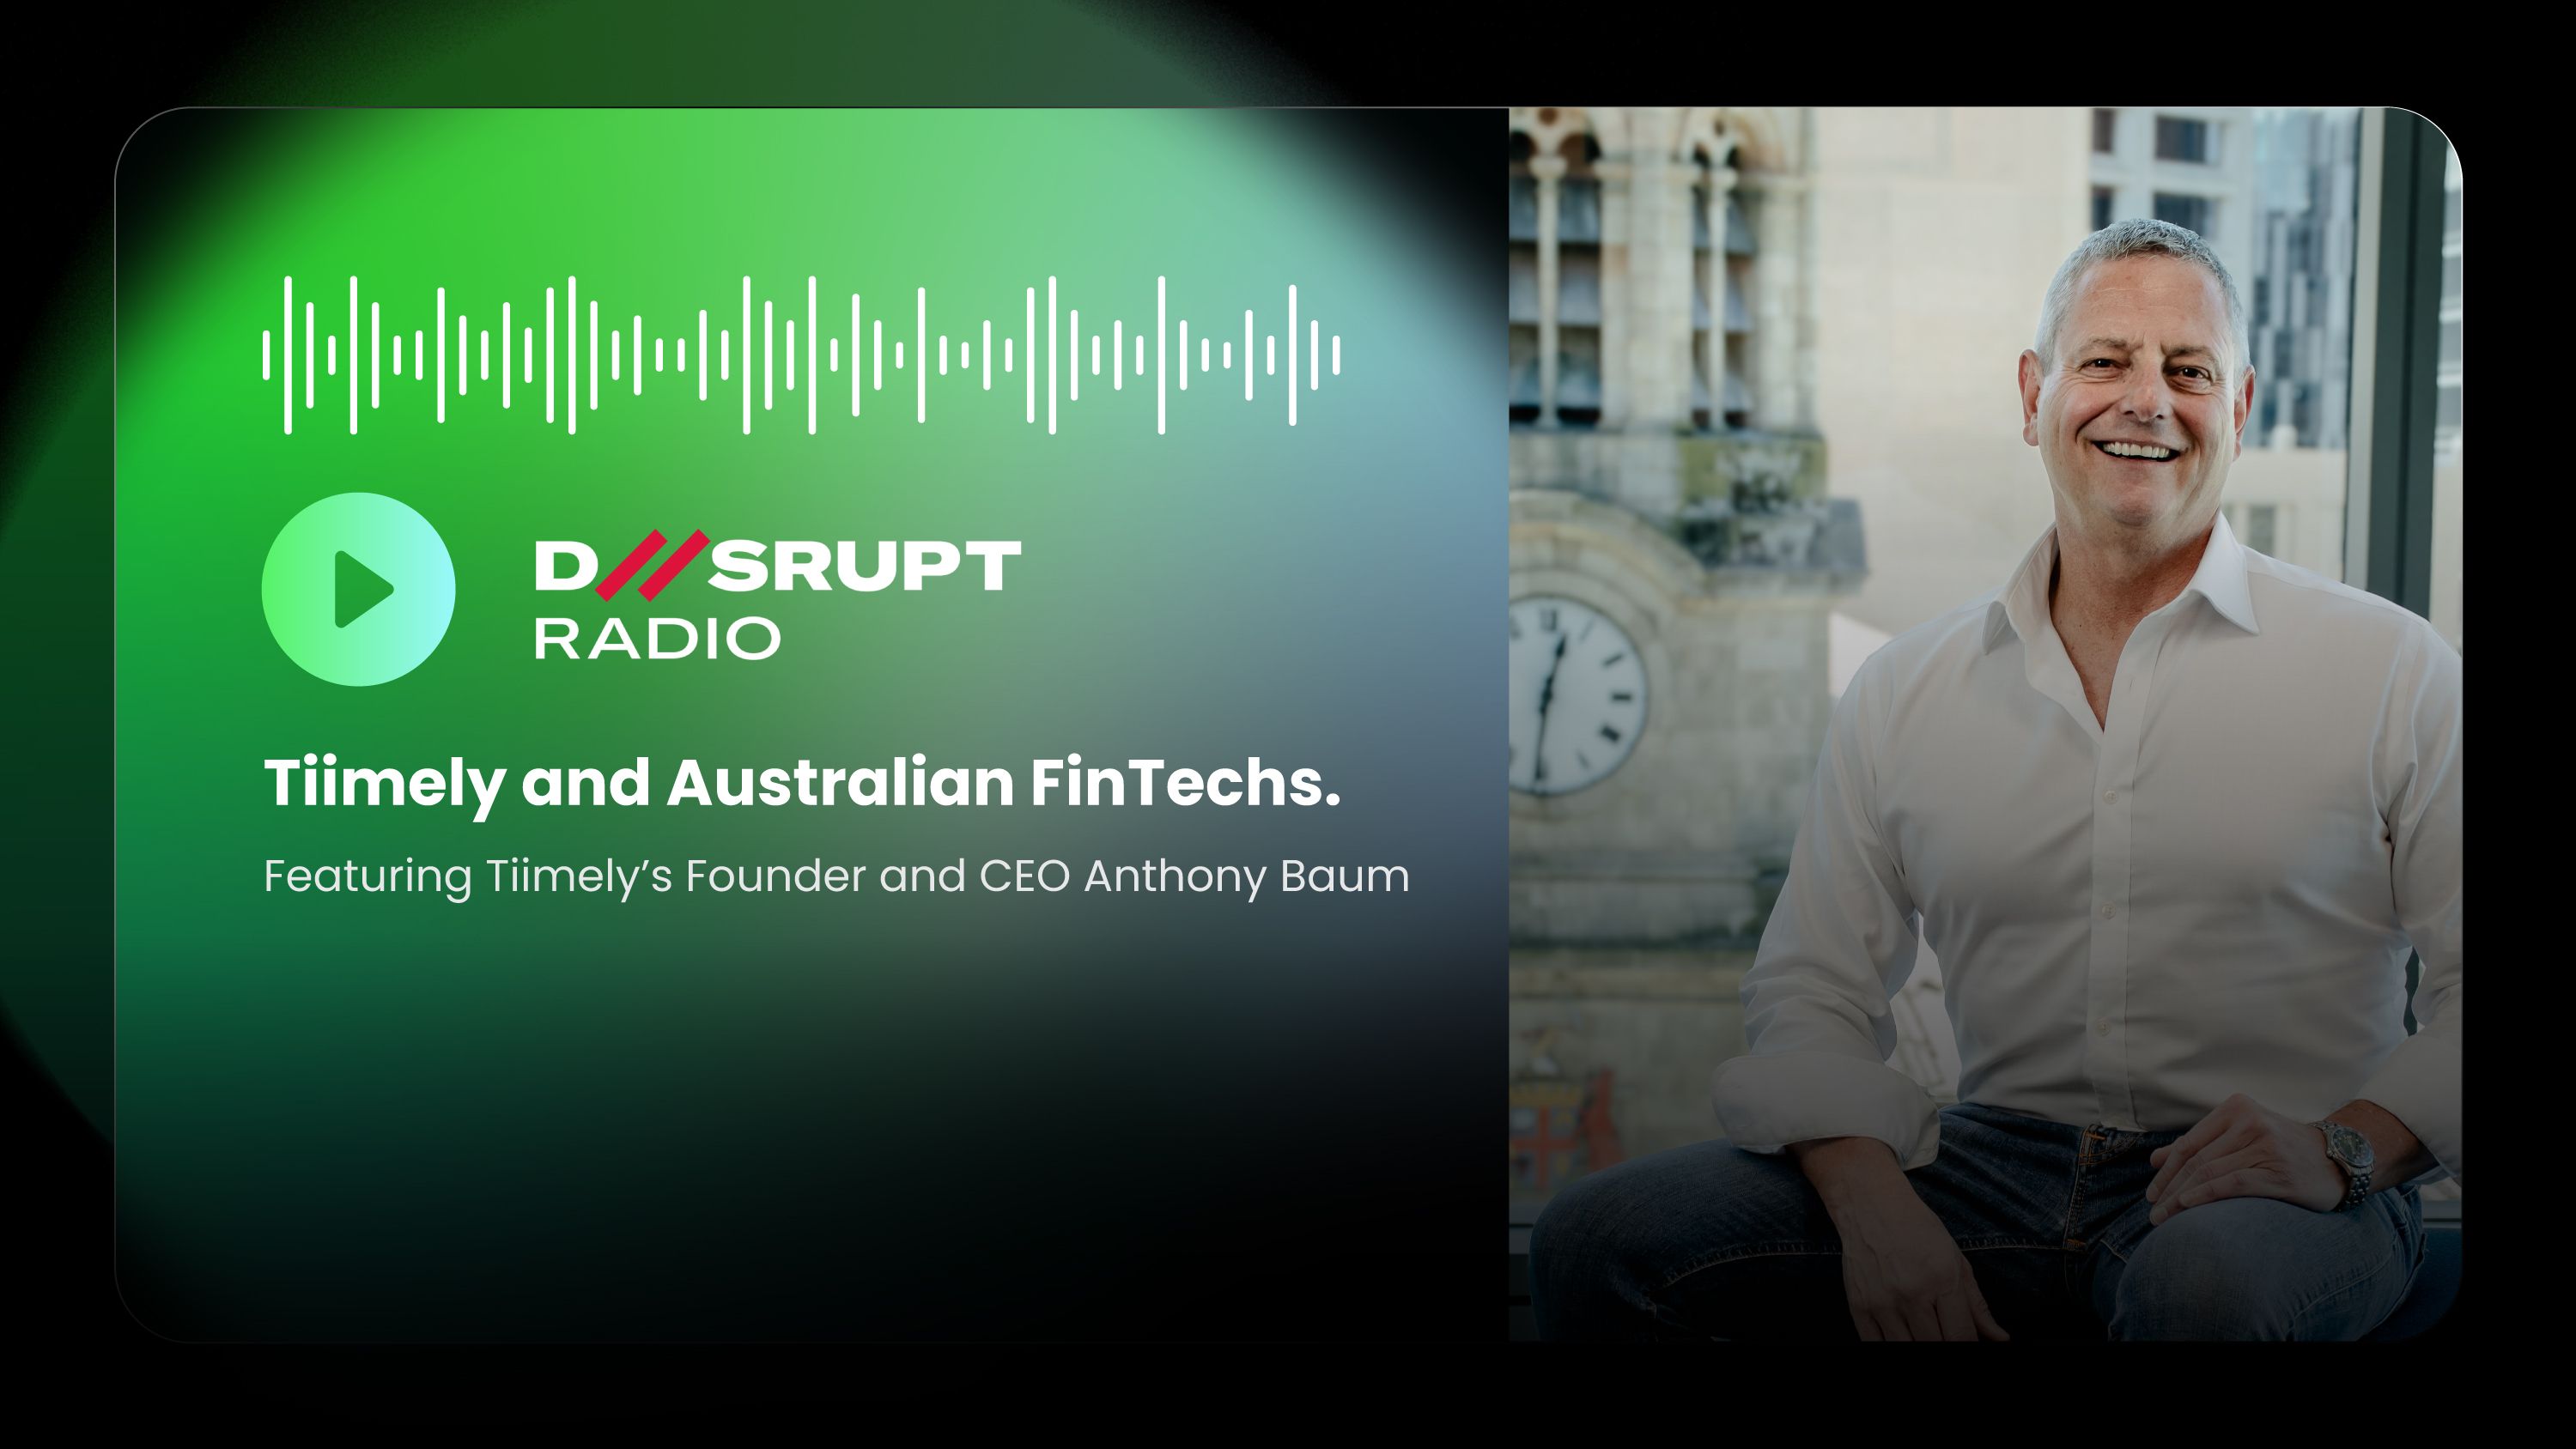 Disrupt Radio interview with CEO Anthony Baum.